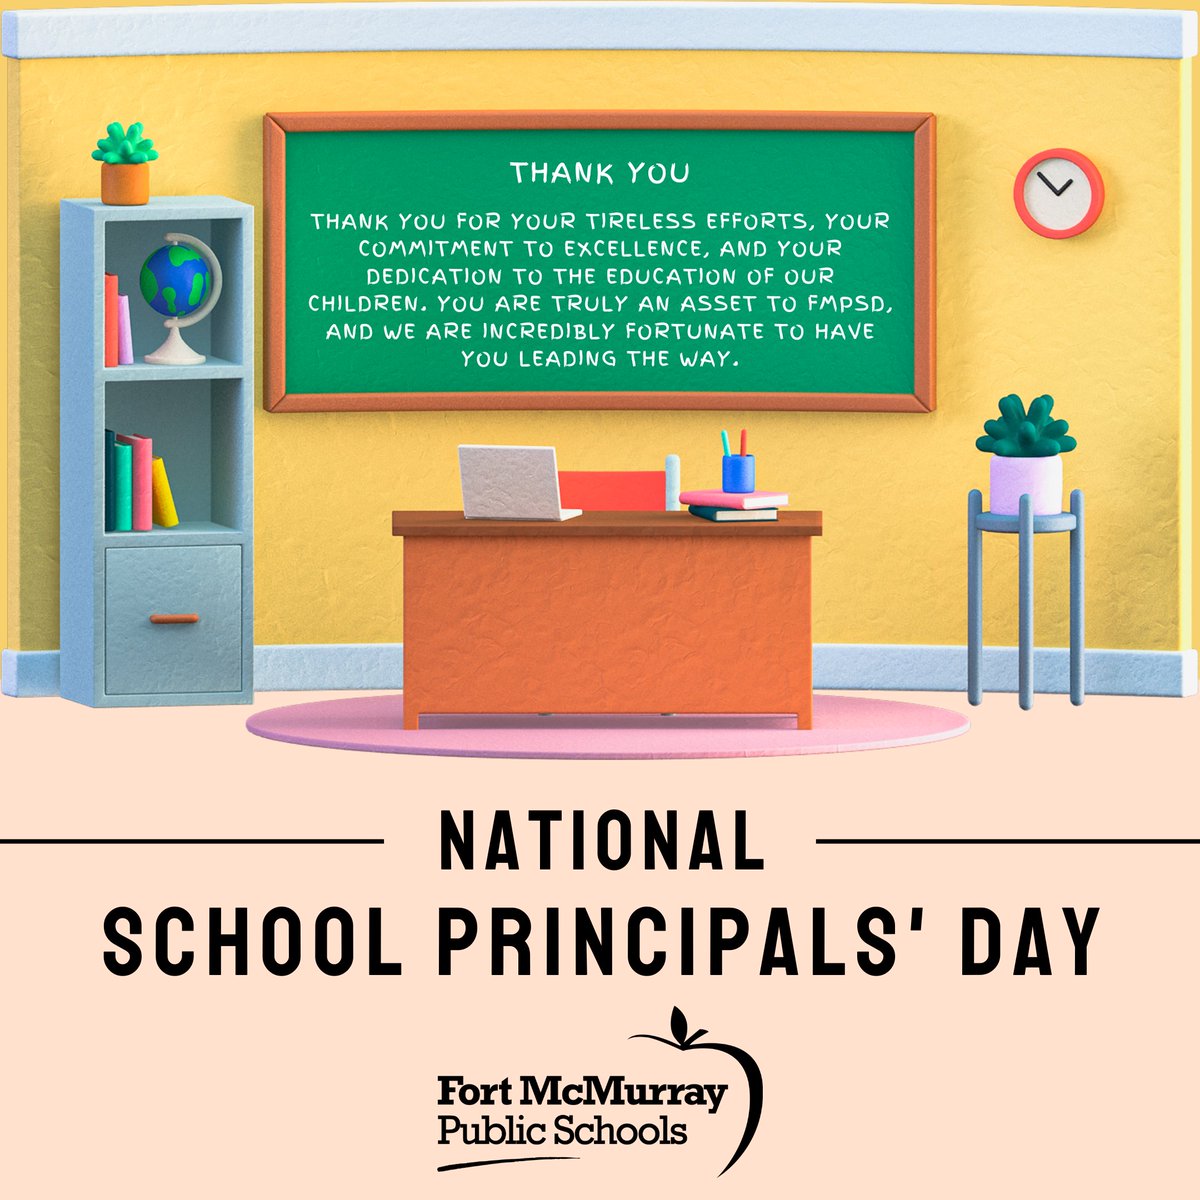 FMPSD would like to extend our heartfelt thank you to all our school principals who put in their tireless efforts each day to make our Division a success. Happy National School Principals' Day! @annaleeskinner #FMPSD #YMM #RMWB